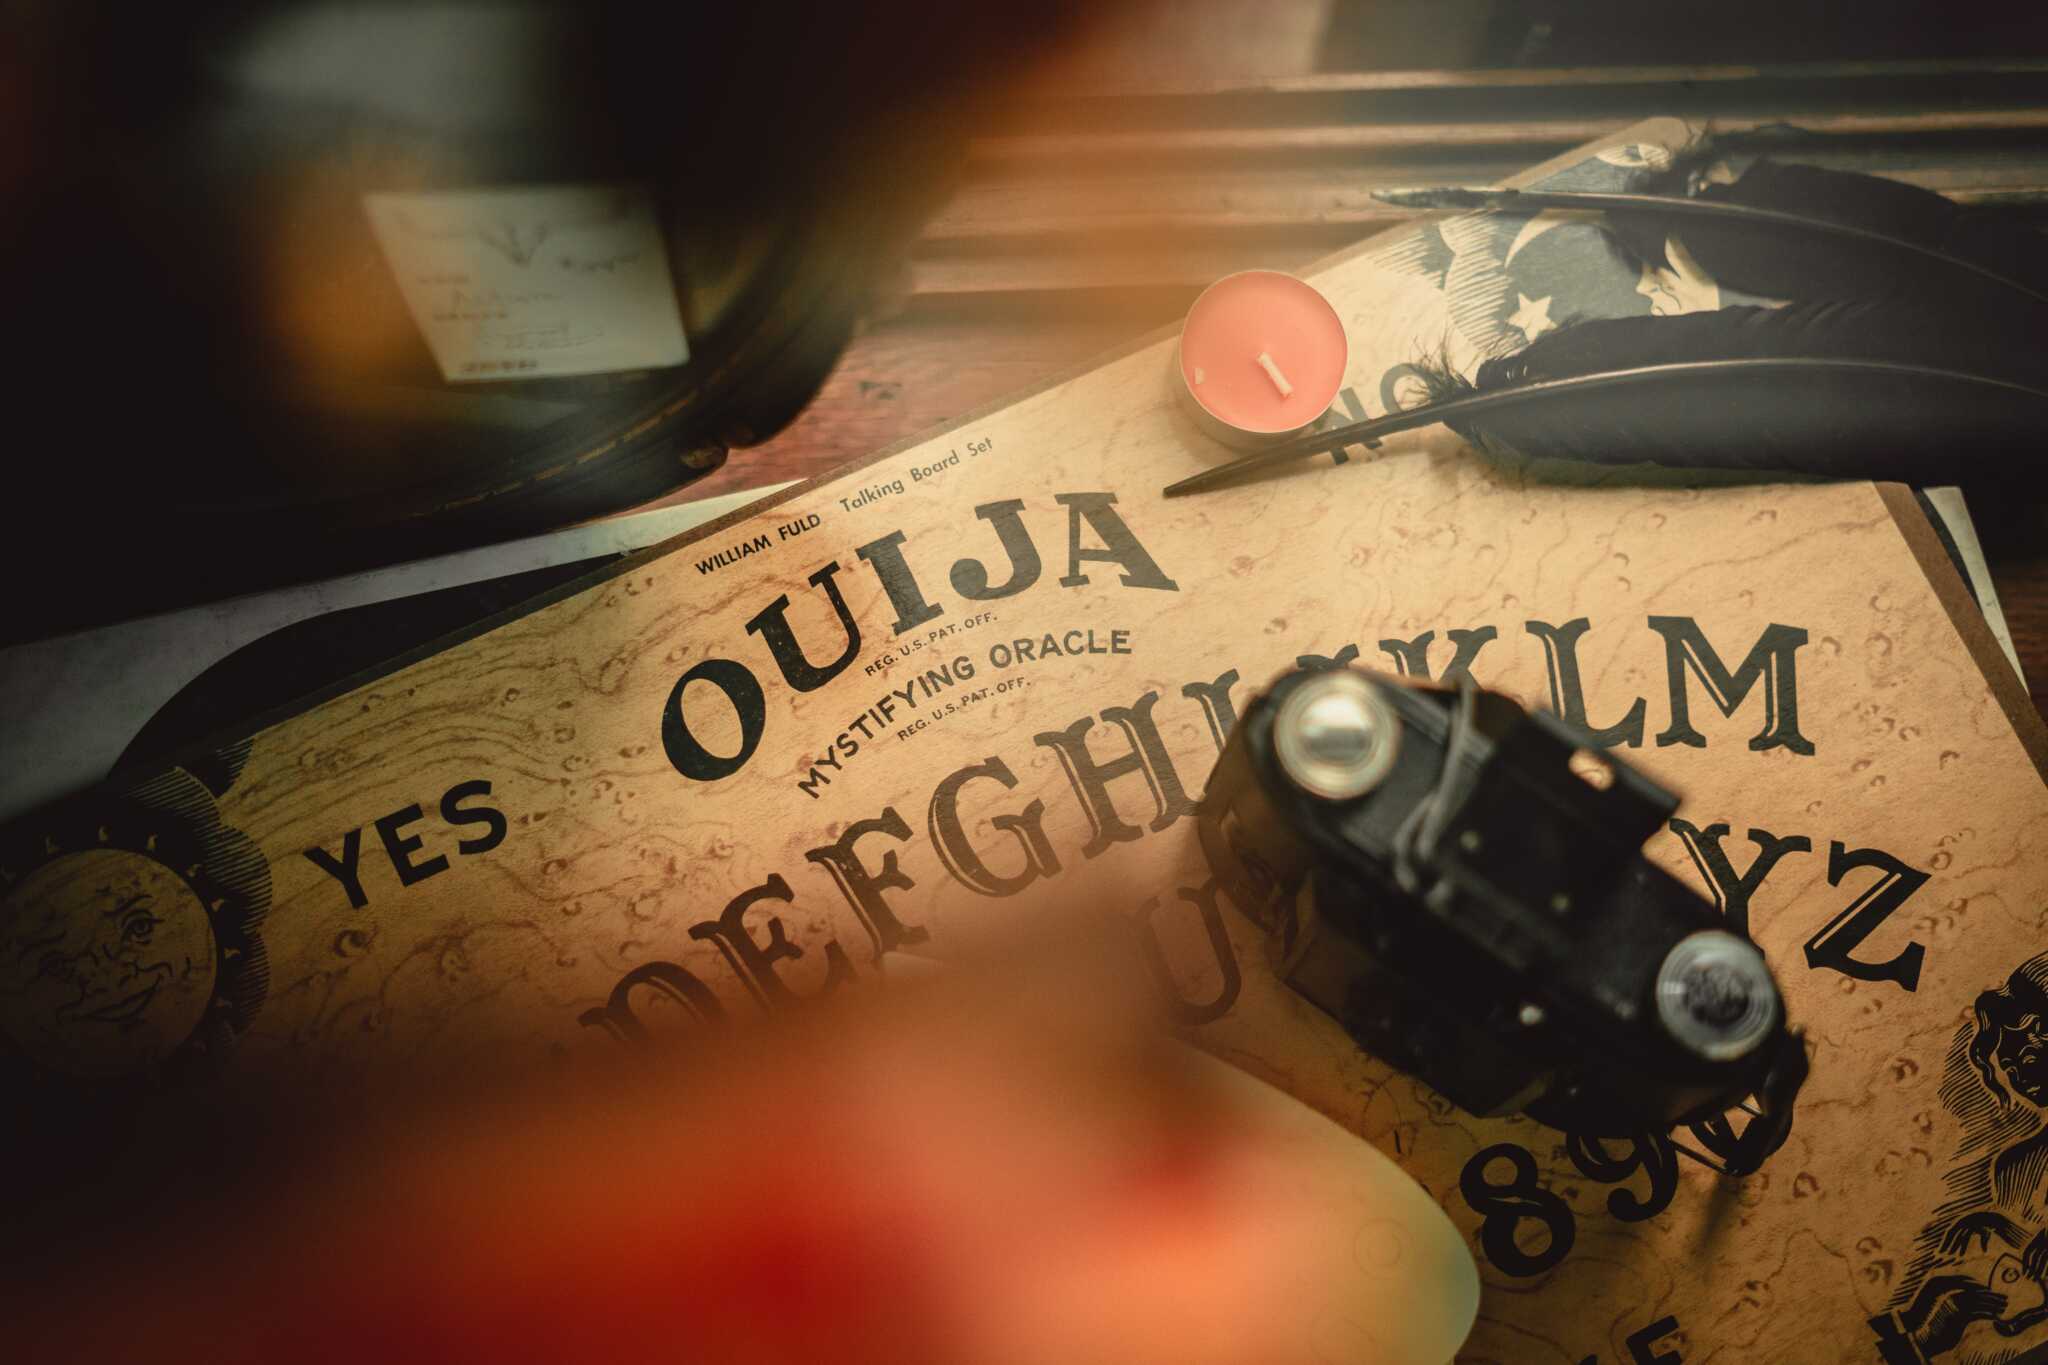 Priest warns of using Ouija Boards to speak to the dead: ‘Inviting a Demon Into Your Life’